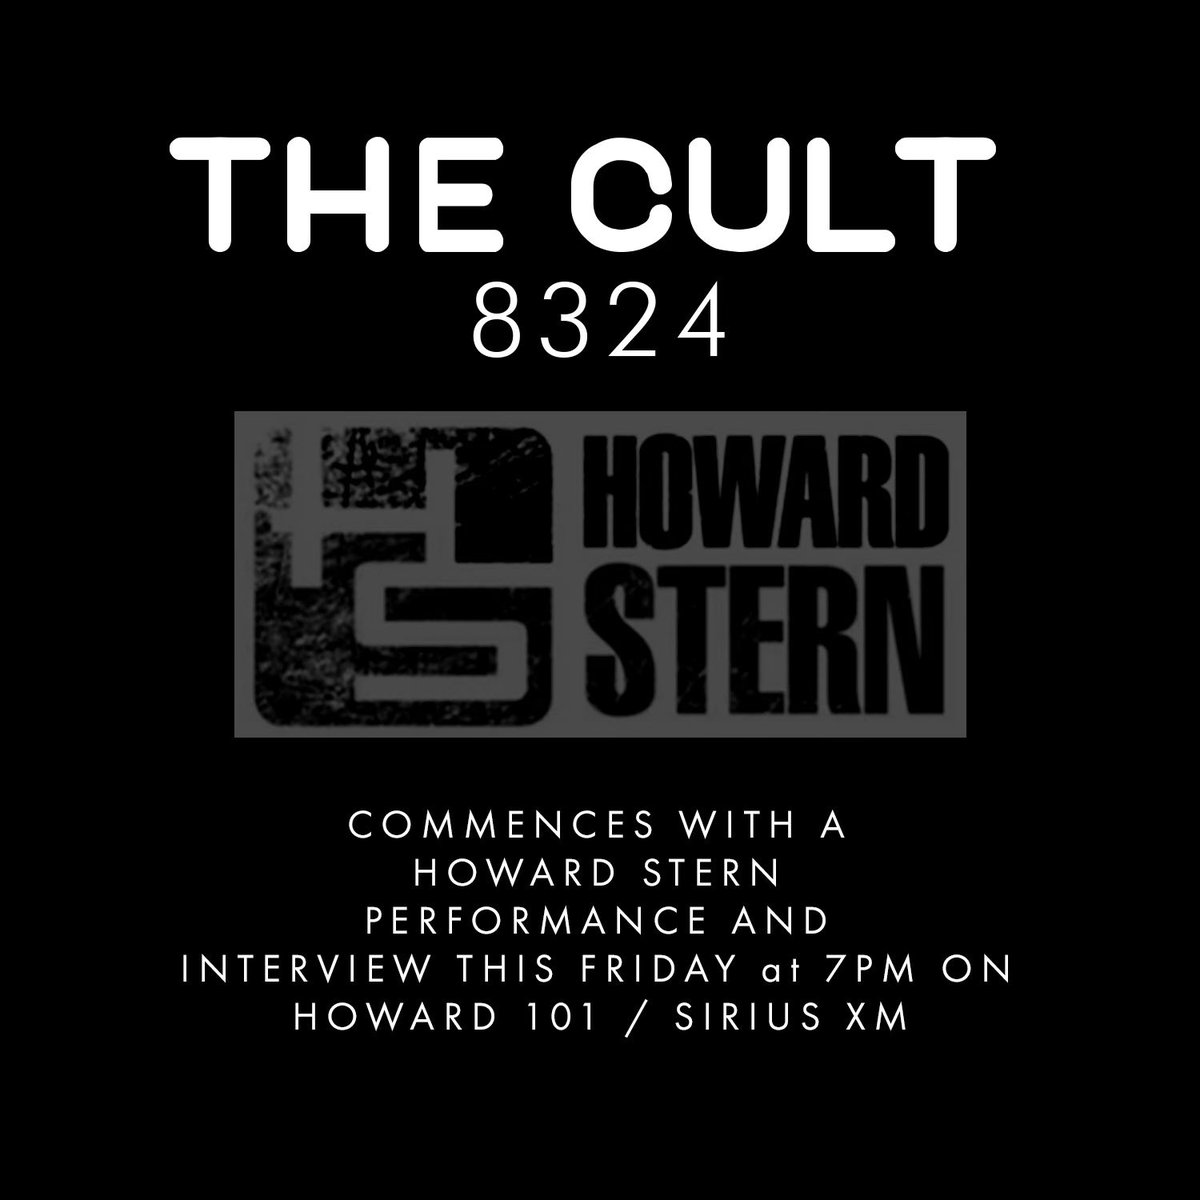 THE CULT 84/24 COMMENCES WITH A @sternshow PERFORMANCE AND INTERVIEW FRIDAY 7PM EST ON HOWARD 101 / @SIRIUSXM